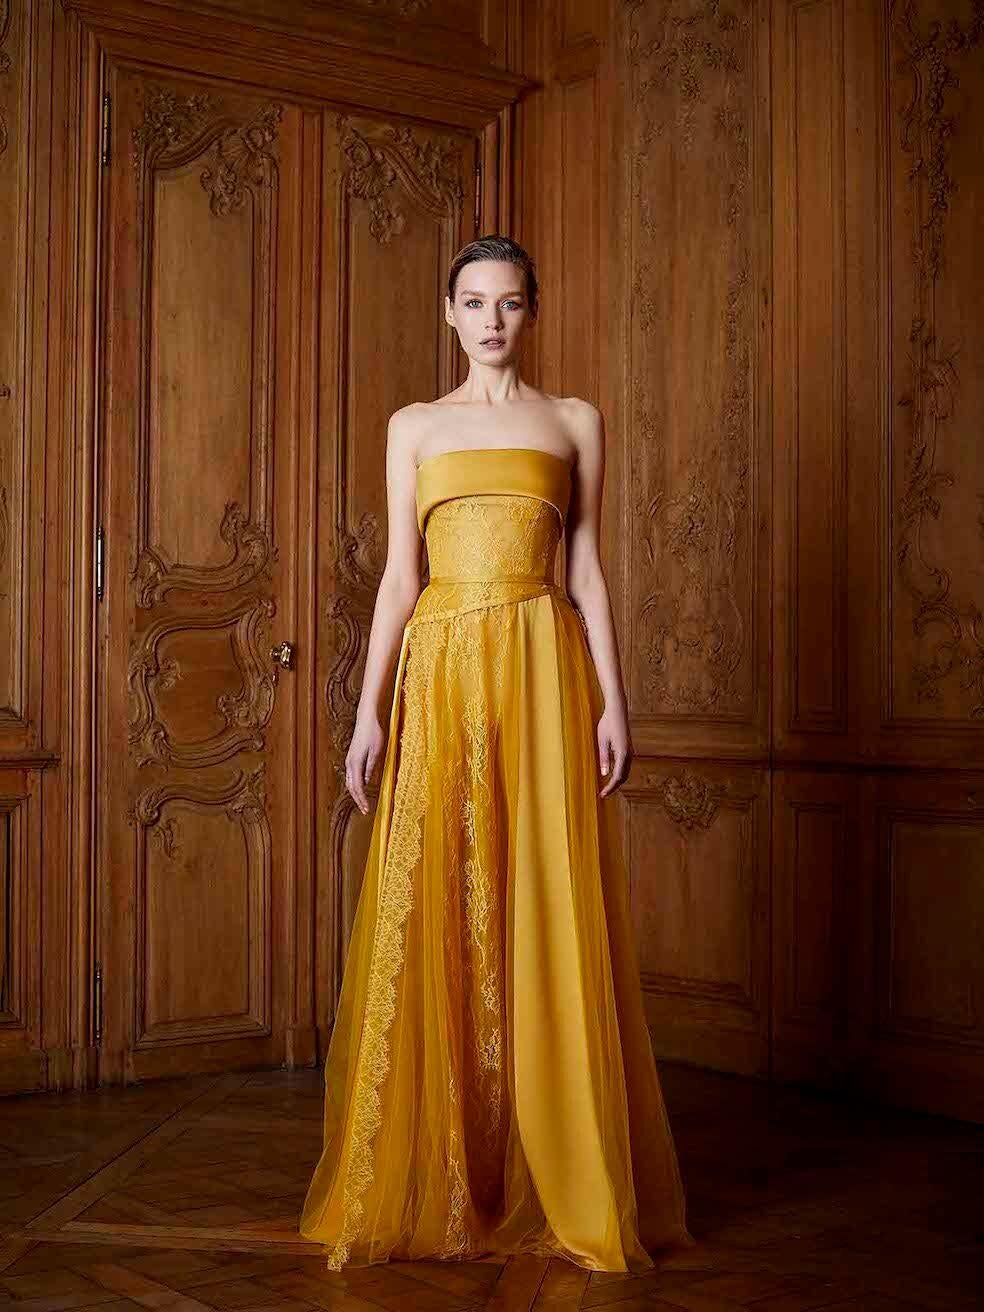 CONDITION is Never Worn With Tag. Minimal wear to dress is evident. Minimal wear to the fabric surface with a small tear in lace trim at the left side of waist on this used Honayda designer resale item.
 
 
 
 Details
 
 
 AW22
 
 Yellow
 
